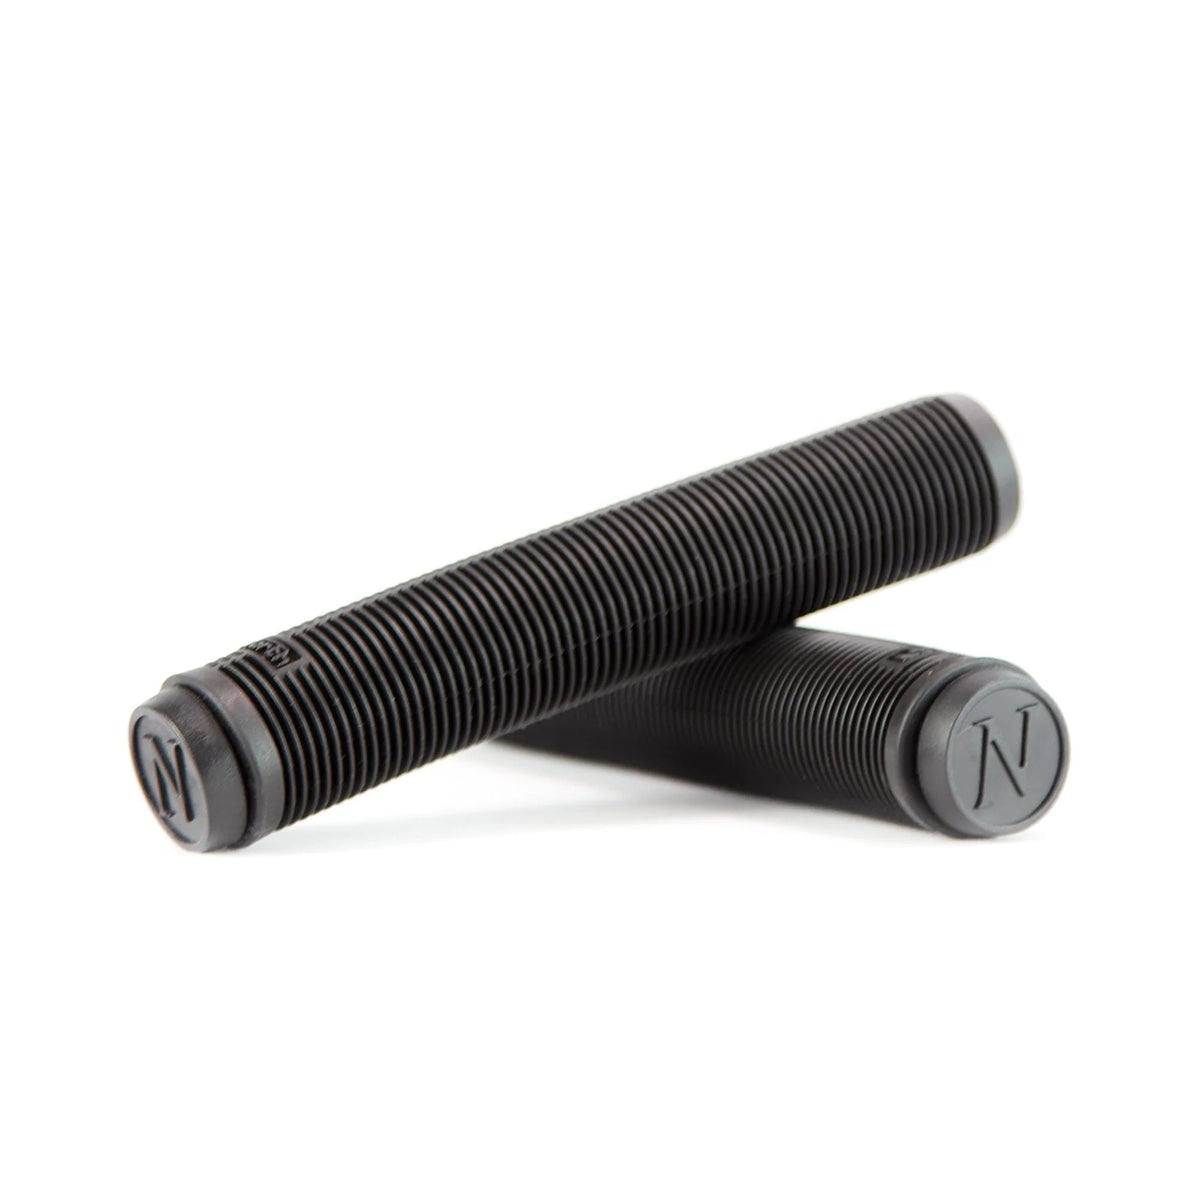 North Essential Grips - Bland Pro Shop